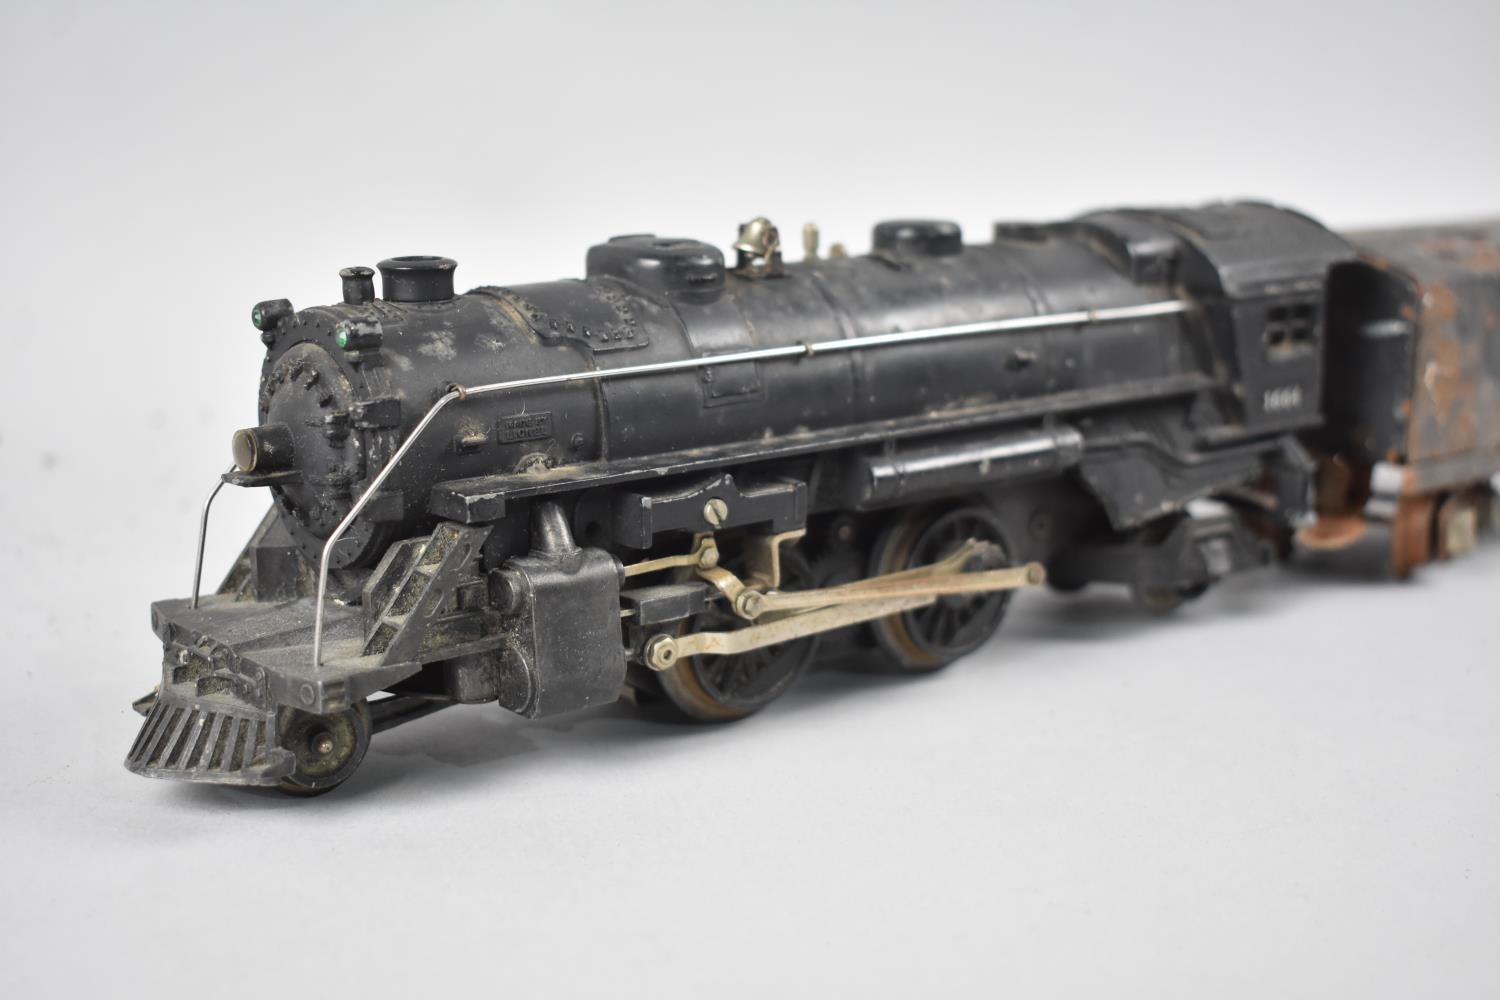 A Lionel Tinplate O-Gauge Model Railway Set comprising Loco, Tender, Pullman Coaches and Track - Image 2 of 2